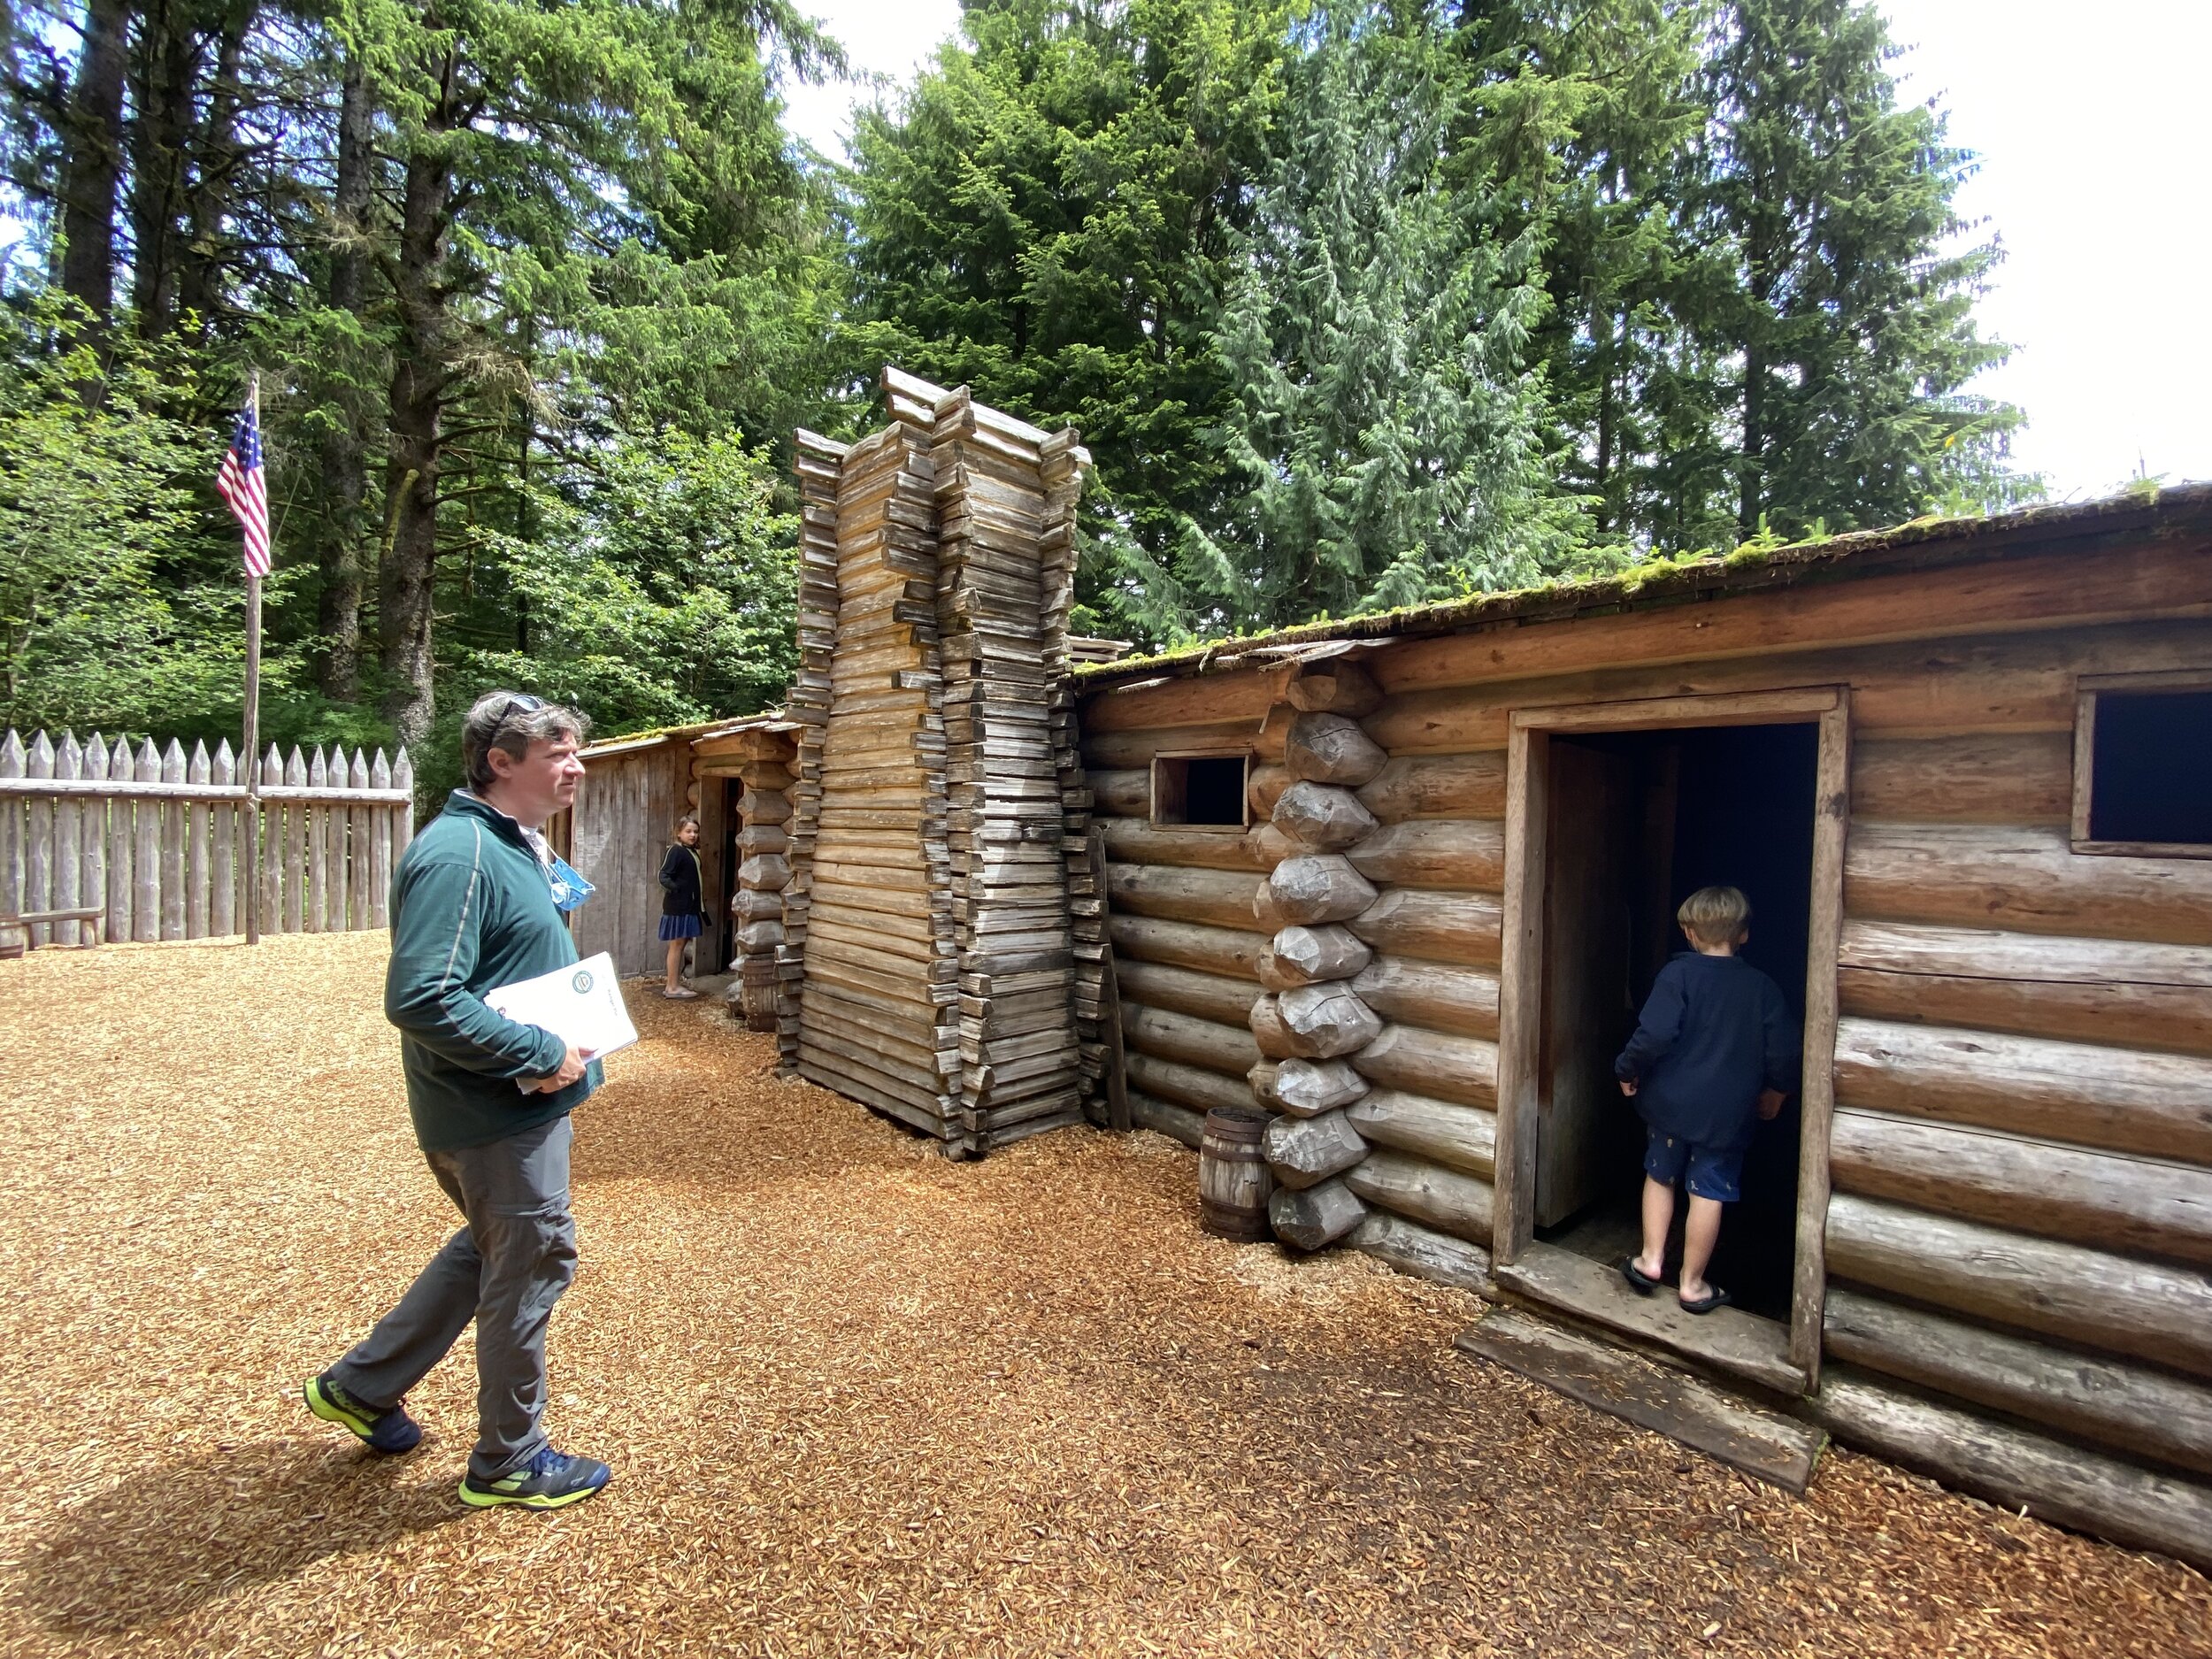 Walking into the living areas at Fort Clatsop in Lewis &amp; Clark National Historical Park.  Photo by Karen Boudreaux, June 15, 2021